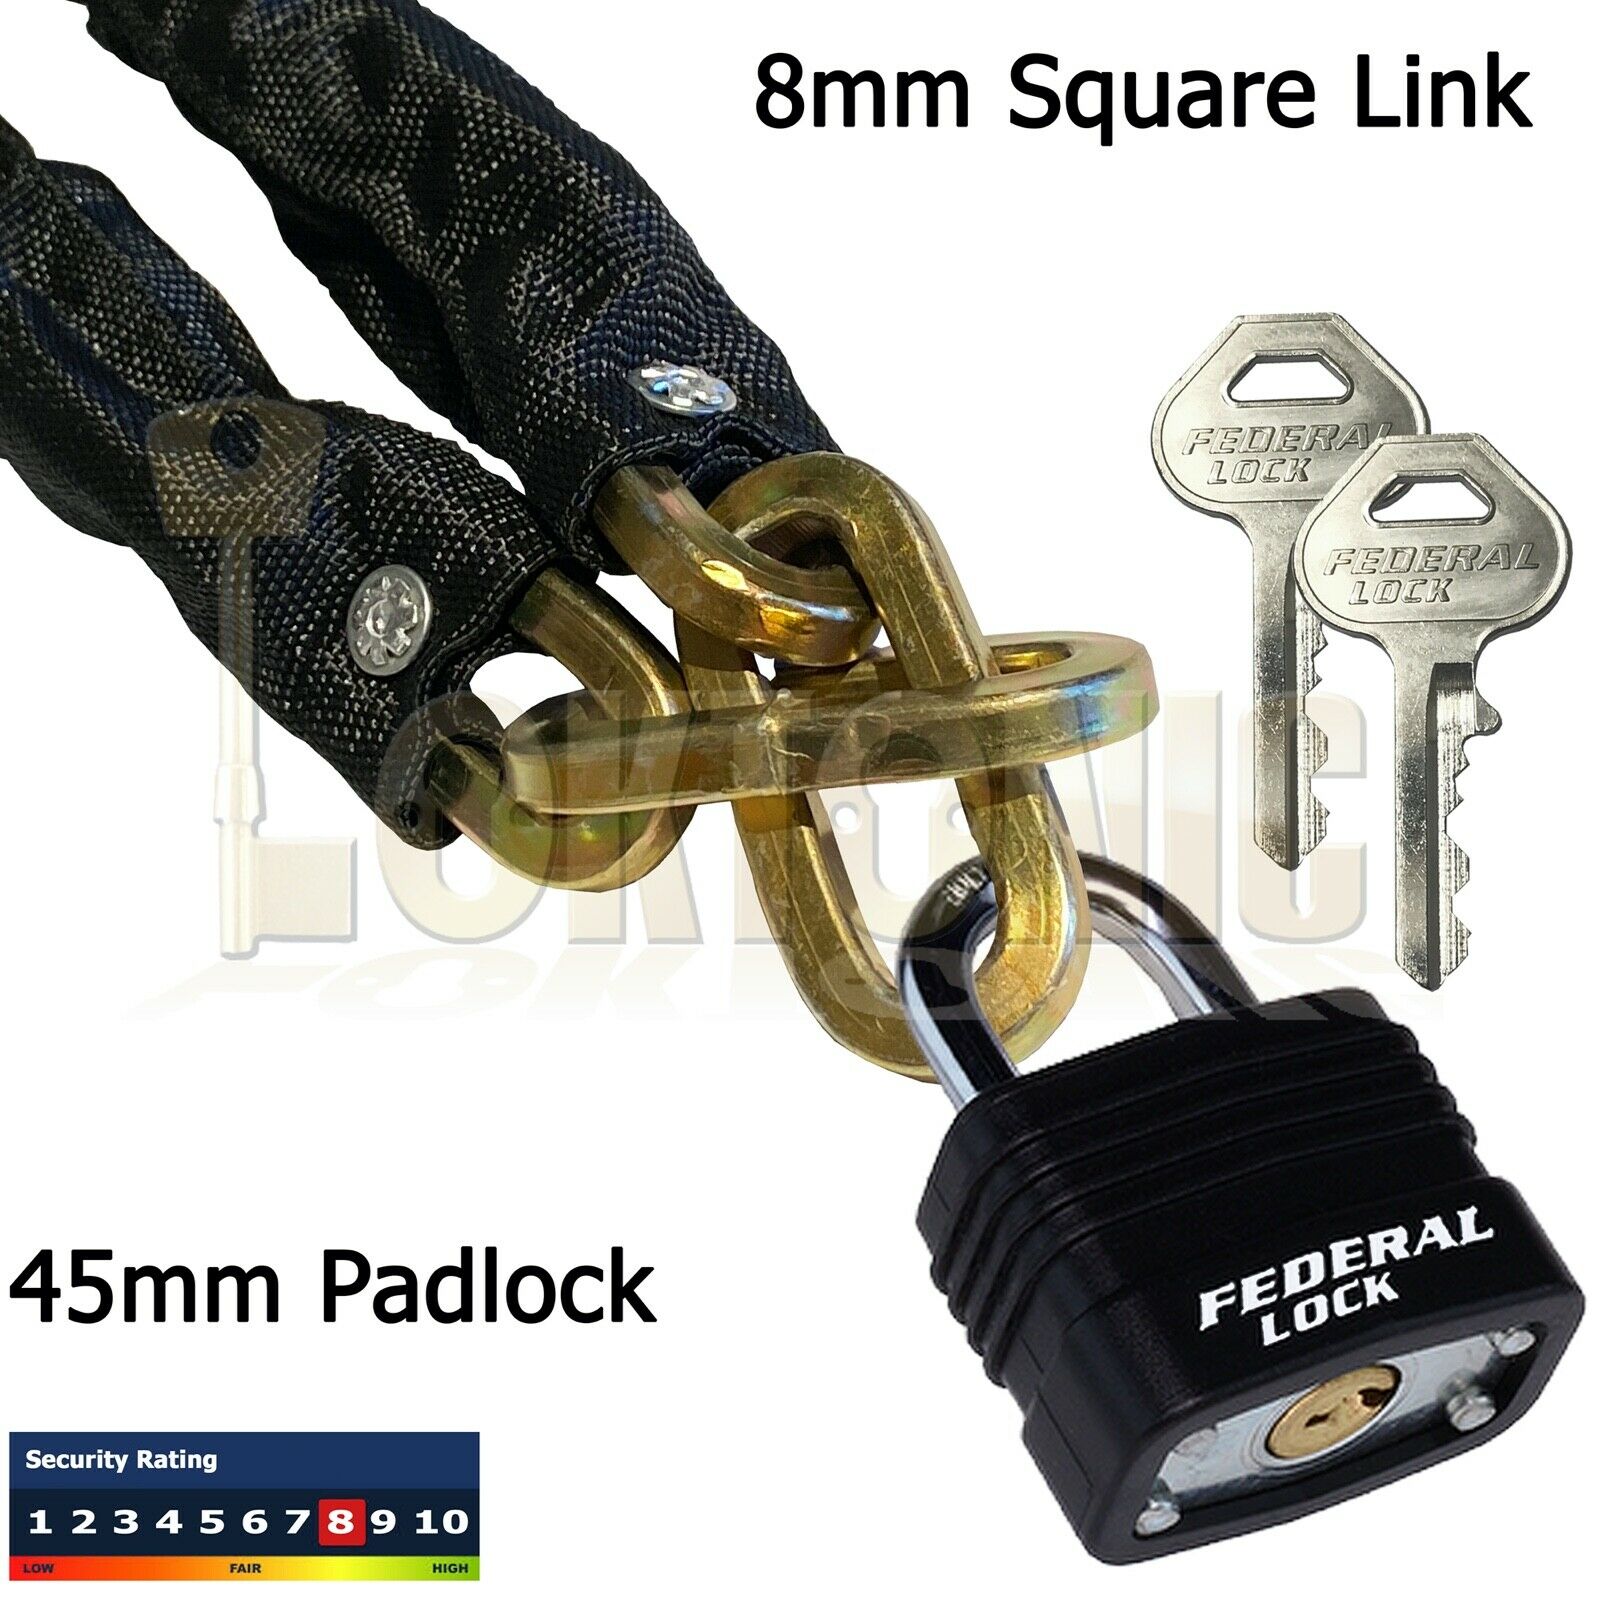 Square Link 8mm Security Hardened Steel Chain+Padlock Bike Bicycle 